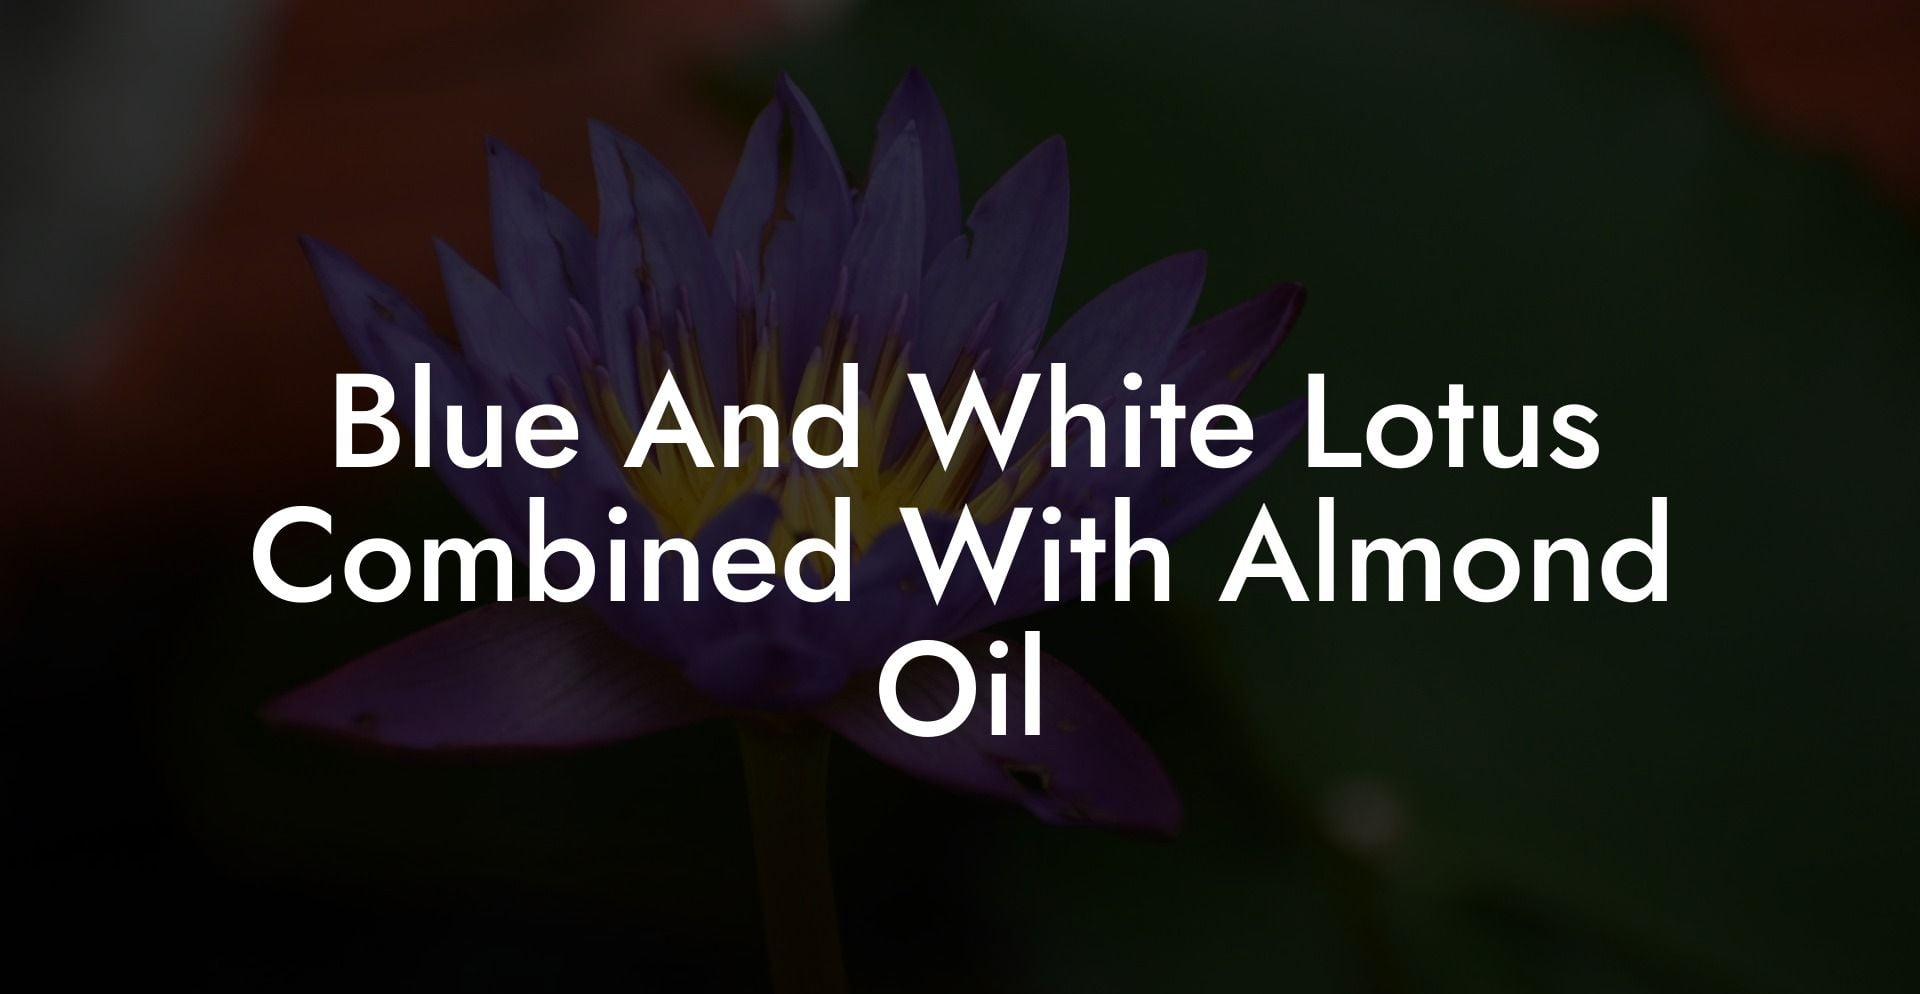 Blue And White Lotus Combined With Almond Oil